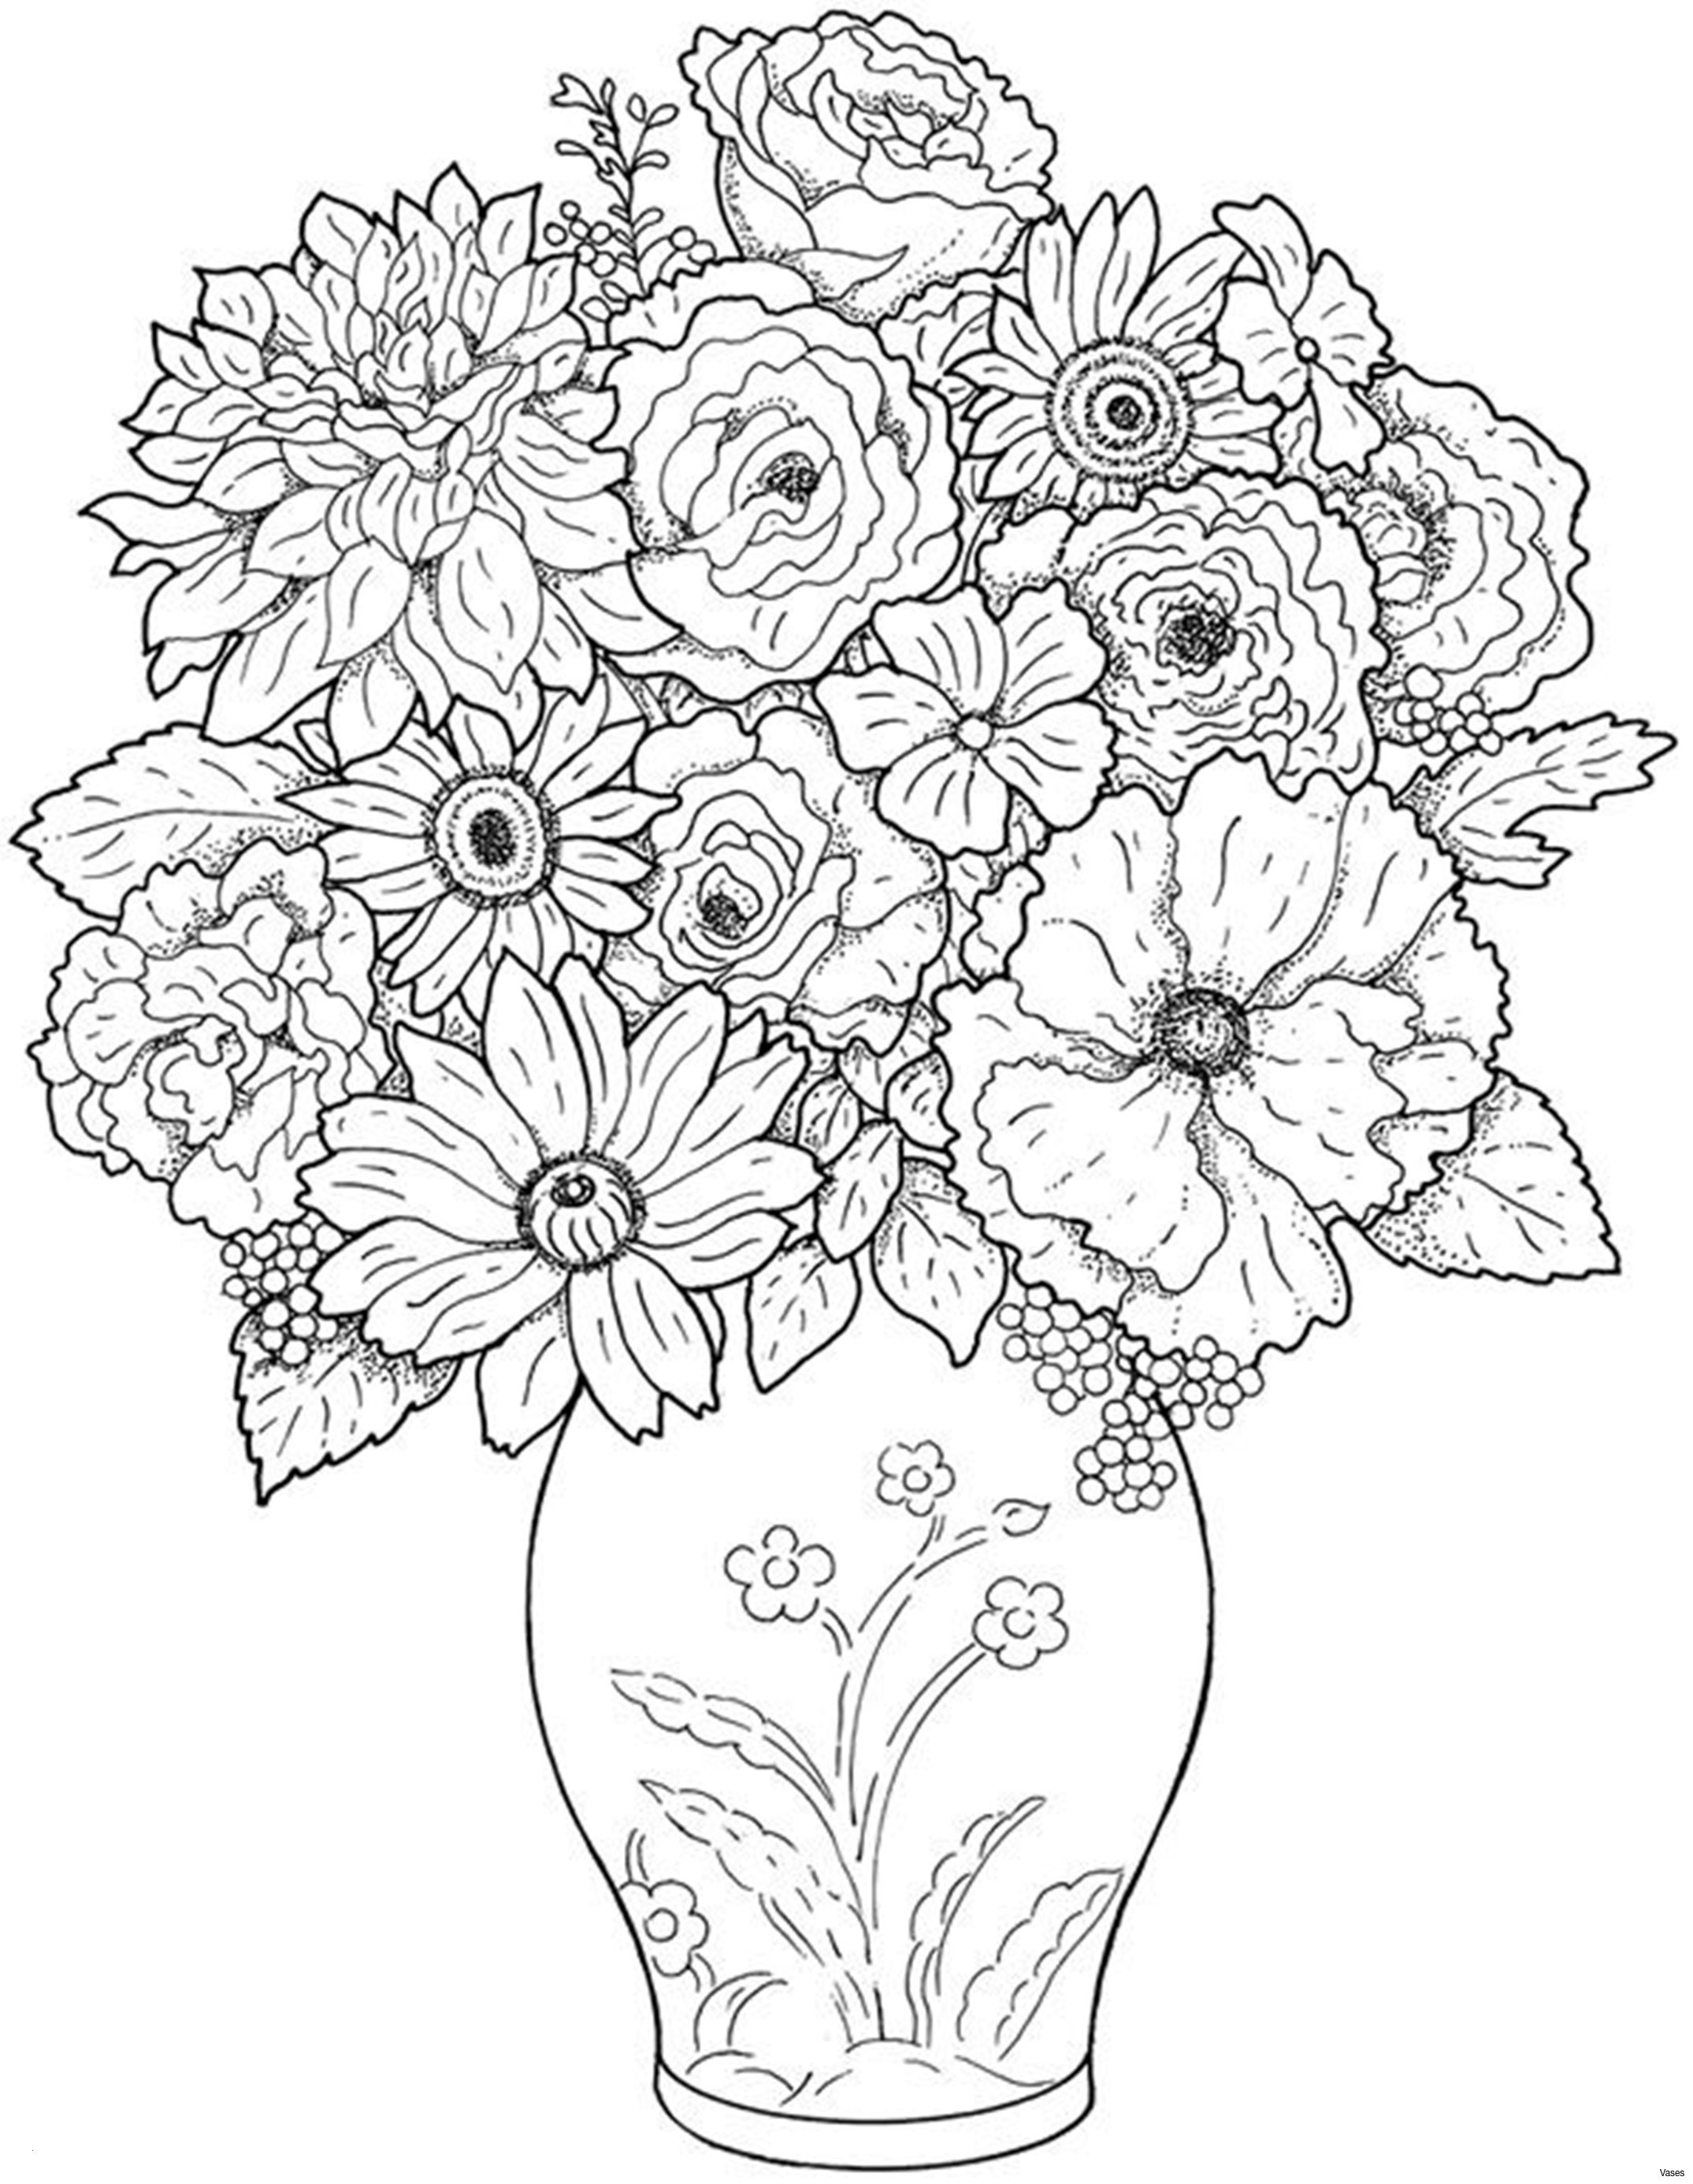 14 Stylish fornasetti Perpetual Face Vase 2024 free download fornasetti perpetual face vase of images of vases with faces vases artificial plants collection inside vases with faces photograph wall coloring pages best cool vases flower vase coloring pa